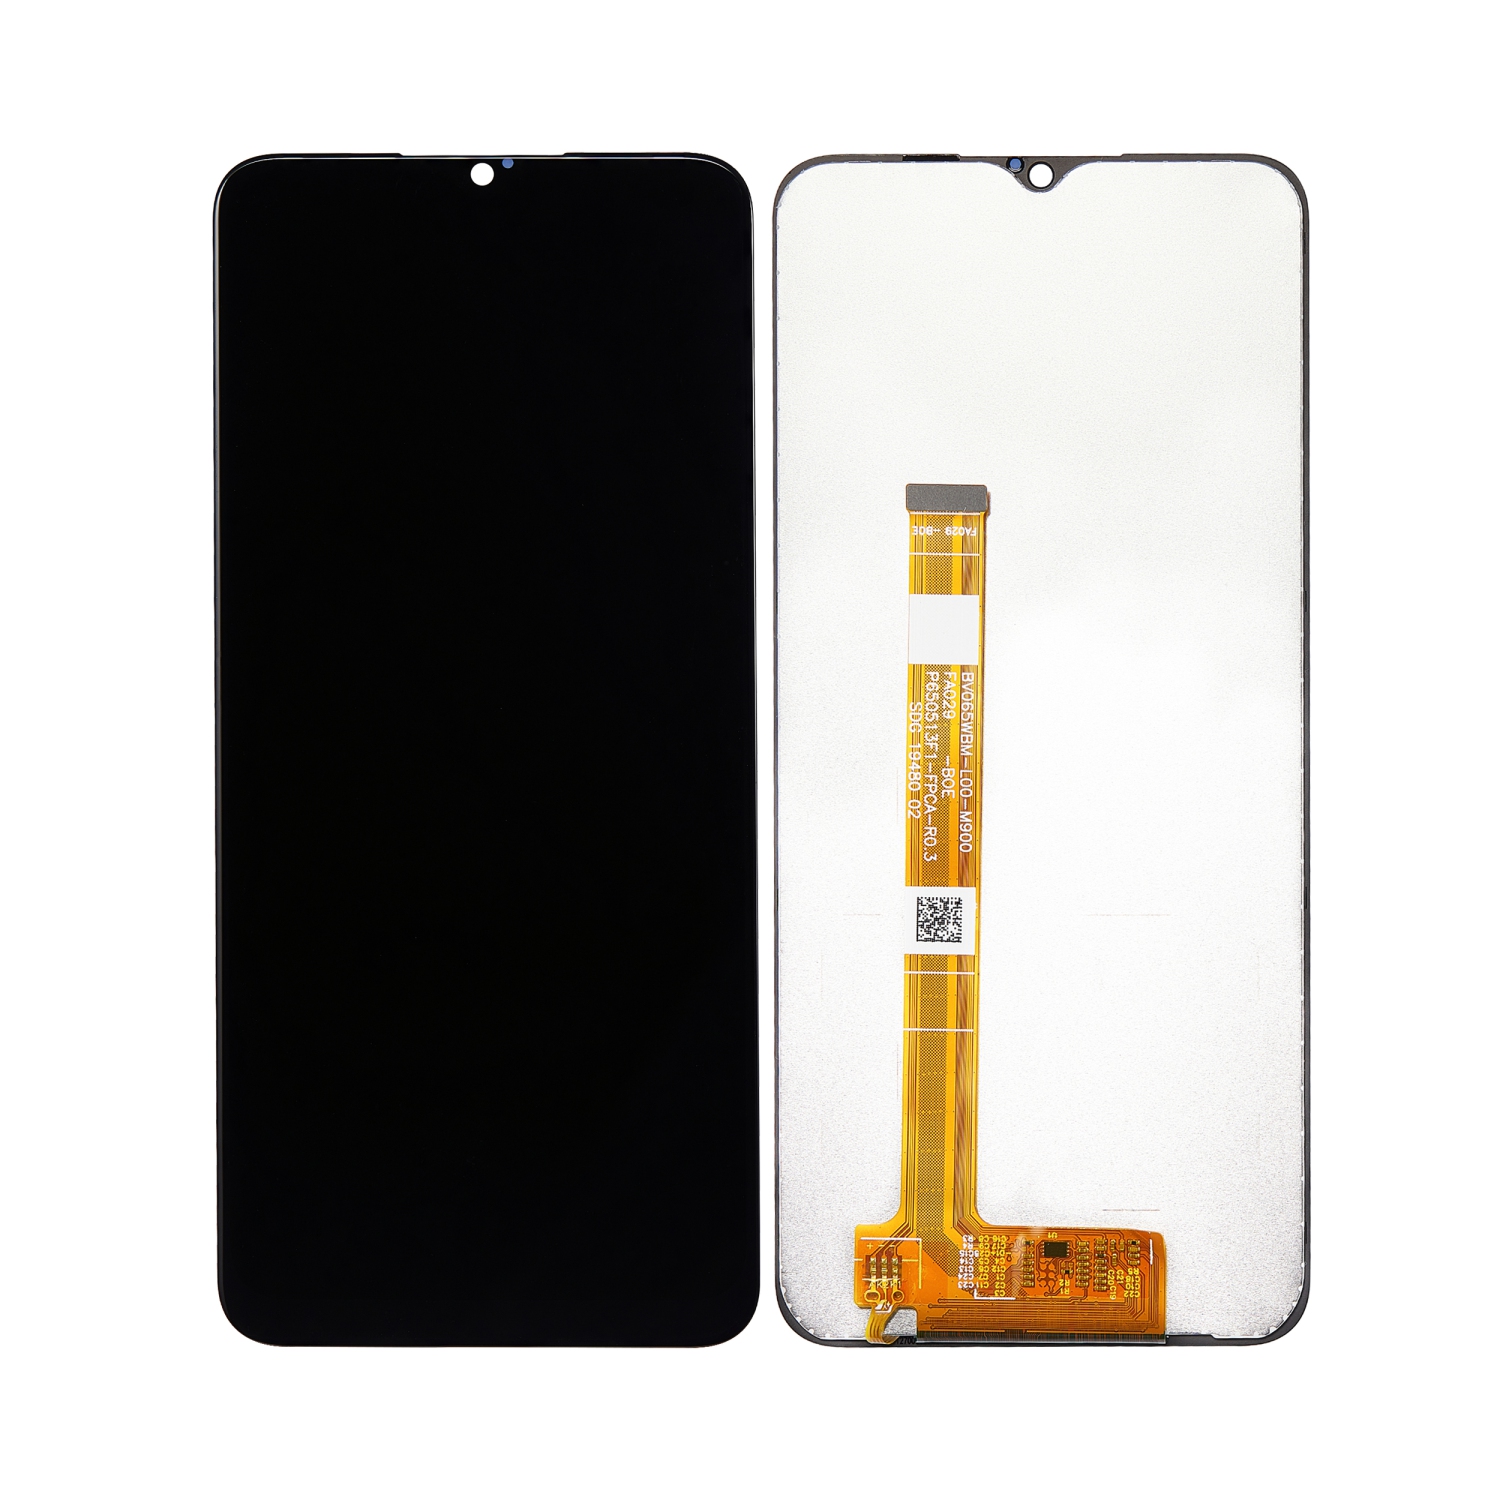 Refurbished (Excellent) - Replacement LCD Assembly Without Frame Compatible For Realme 5i / 5 / 5S / C3 / C3i / 6i / Narzo 20A / OPPO A5 2020 / A9 2020 (All Colors)